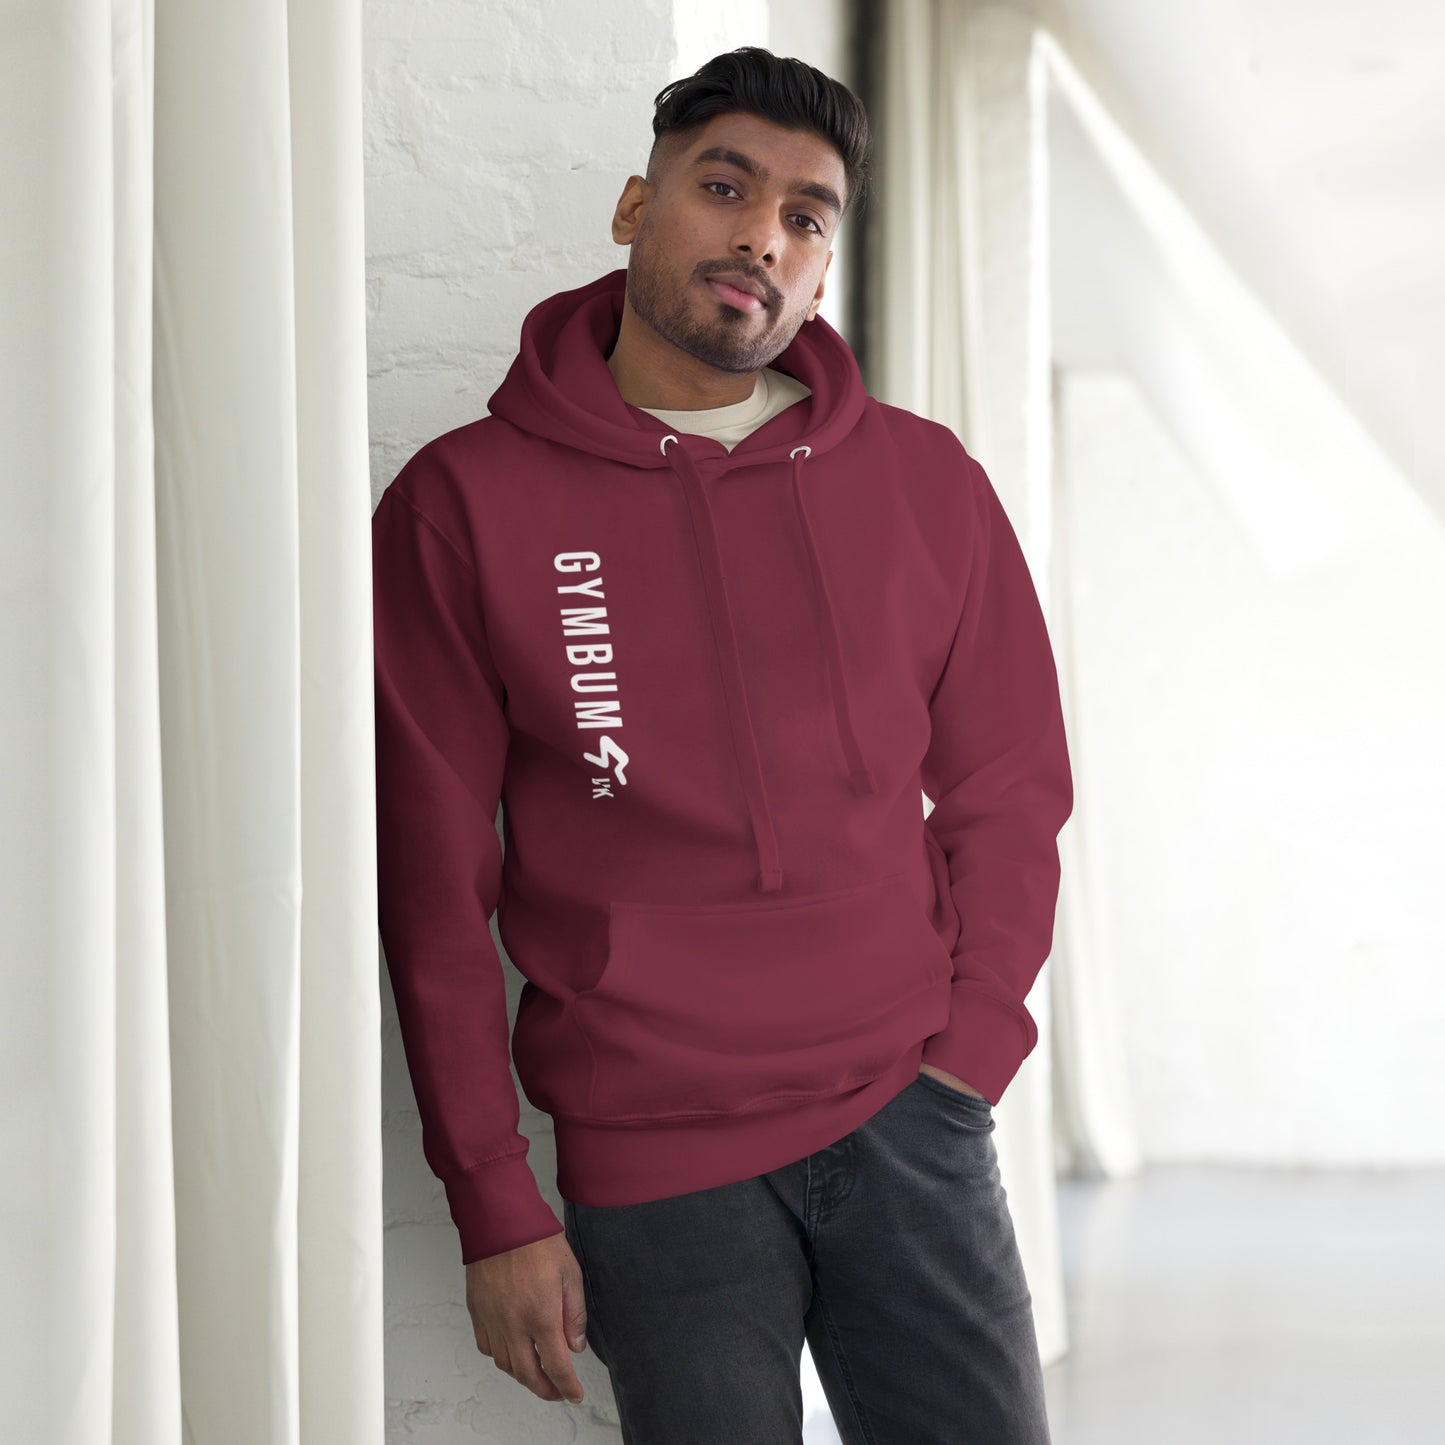 The GymbumUK Long Logo Gender Neutral Pullover Hooded top